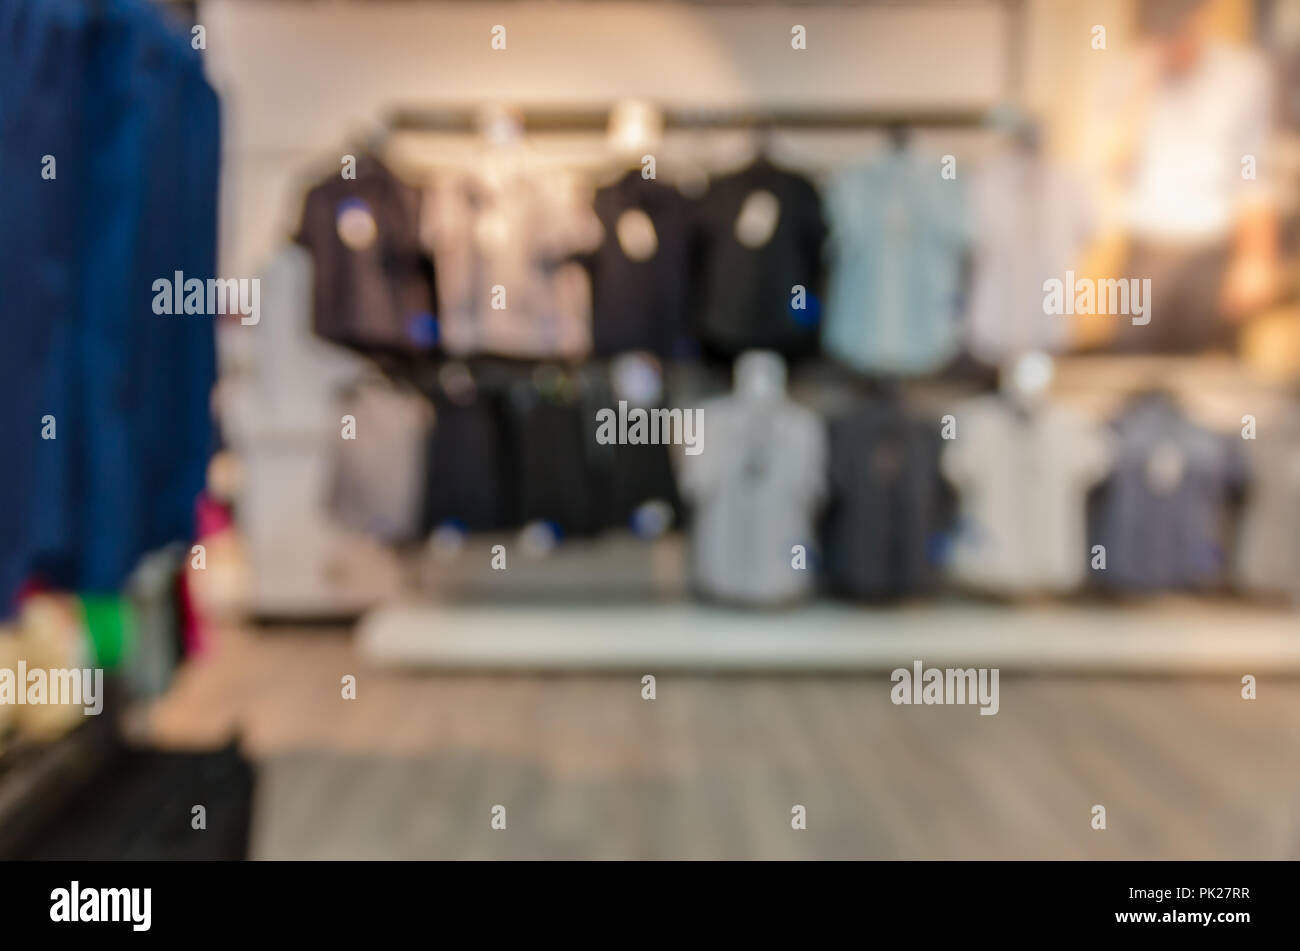 Abstract blurred photo of clothing store in a shopping mall, shopping ...